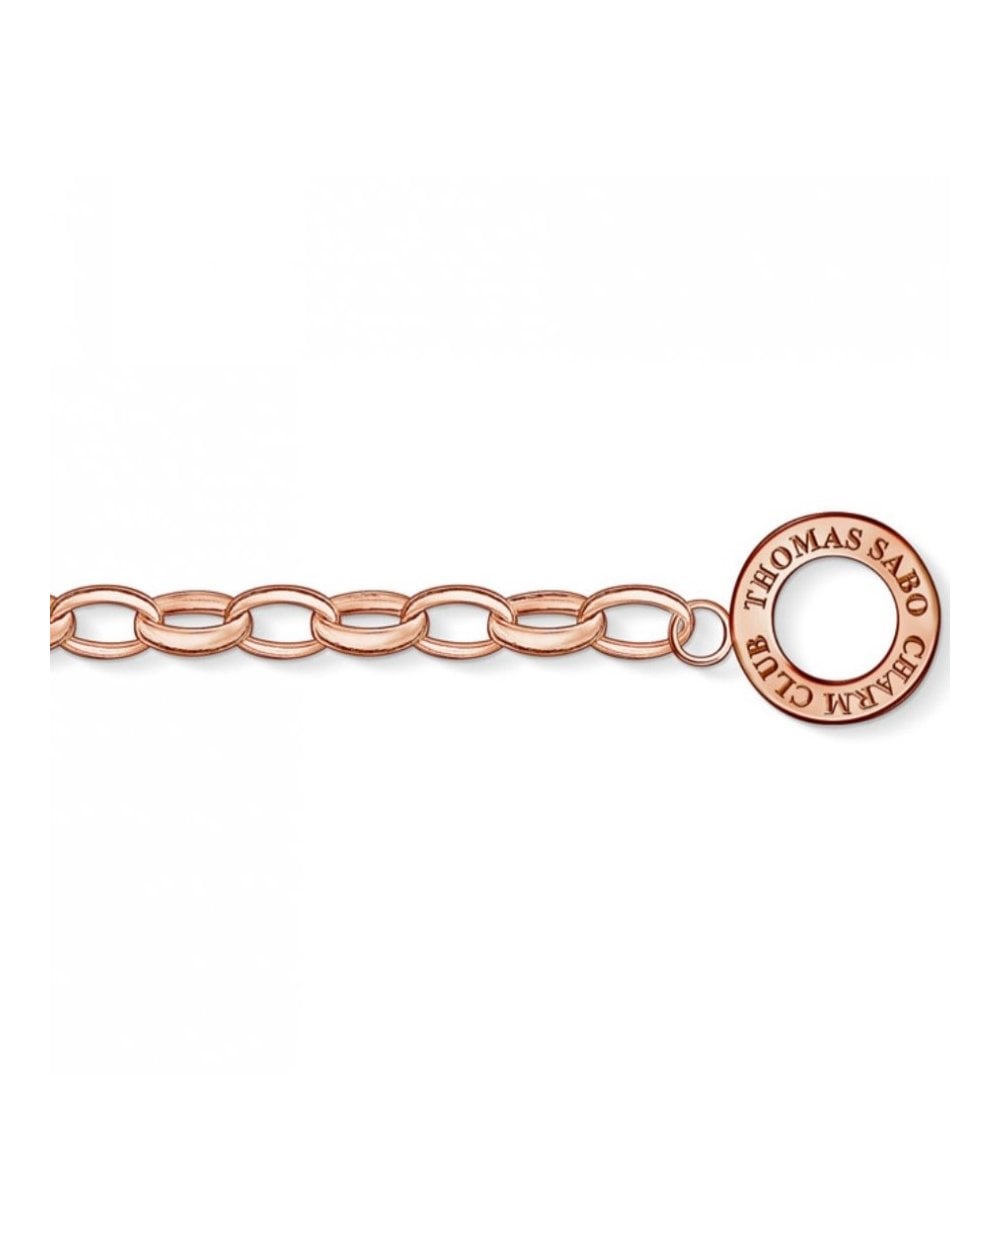 Rose-Gold Plated Charm Club Bracelet in Small